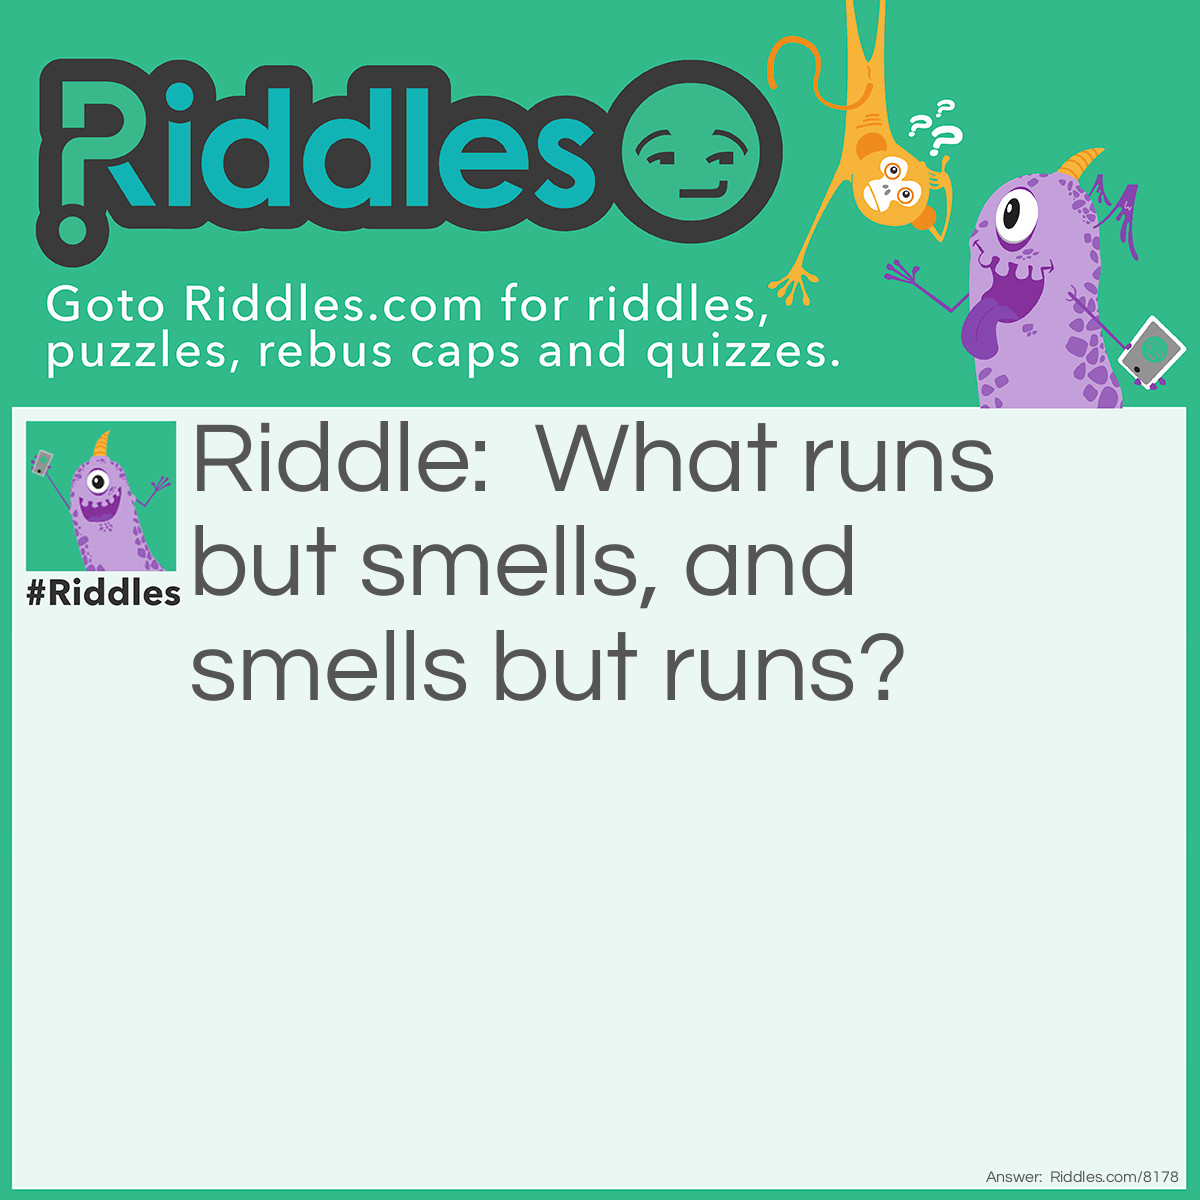 Riddle: What runs but smells, and smells but runs? Answer: Your feet.